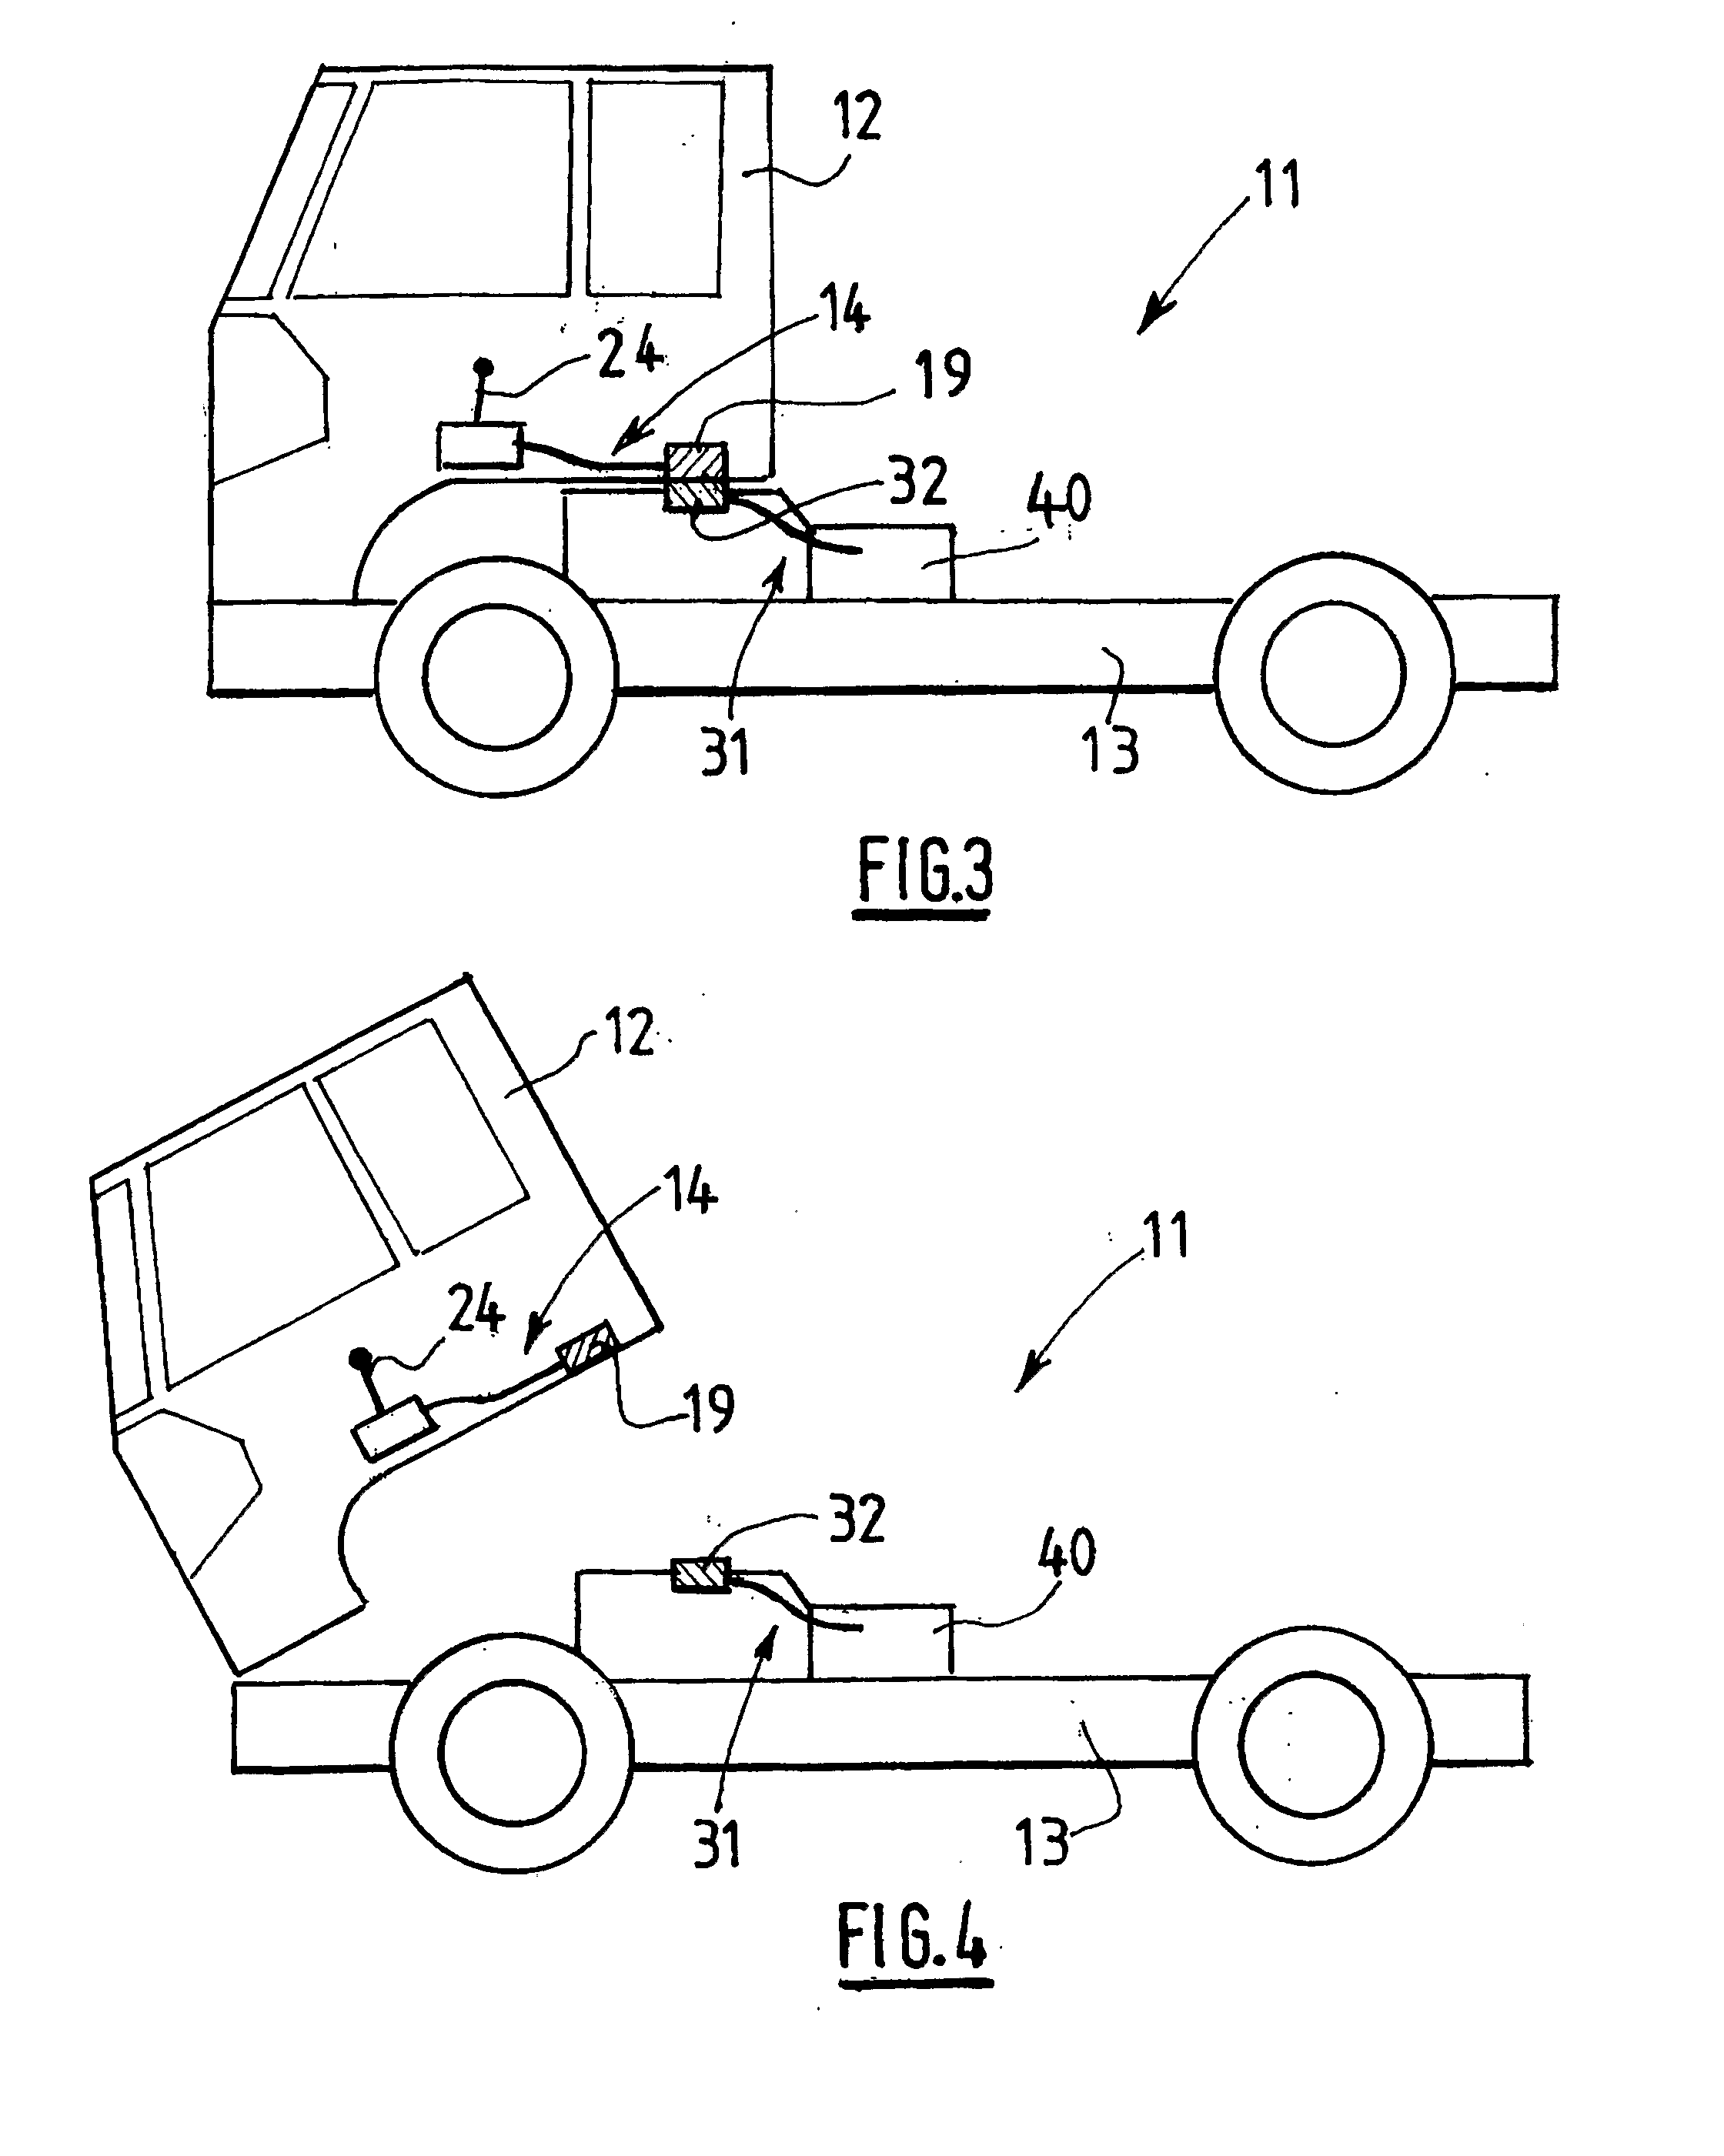 Cable and/or rod control system for a gearbox on a heavy goods vehicle with tilting cab